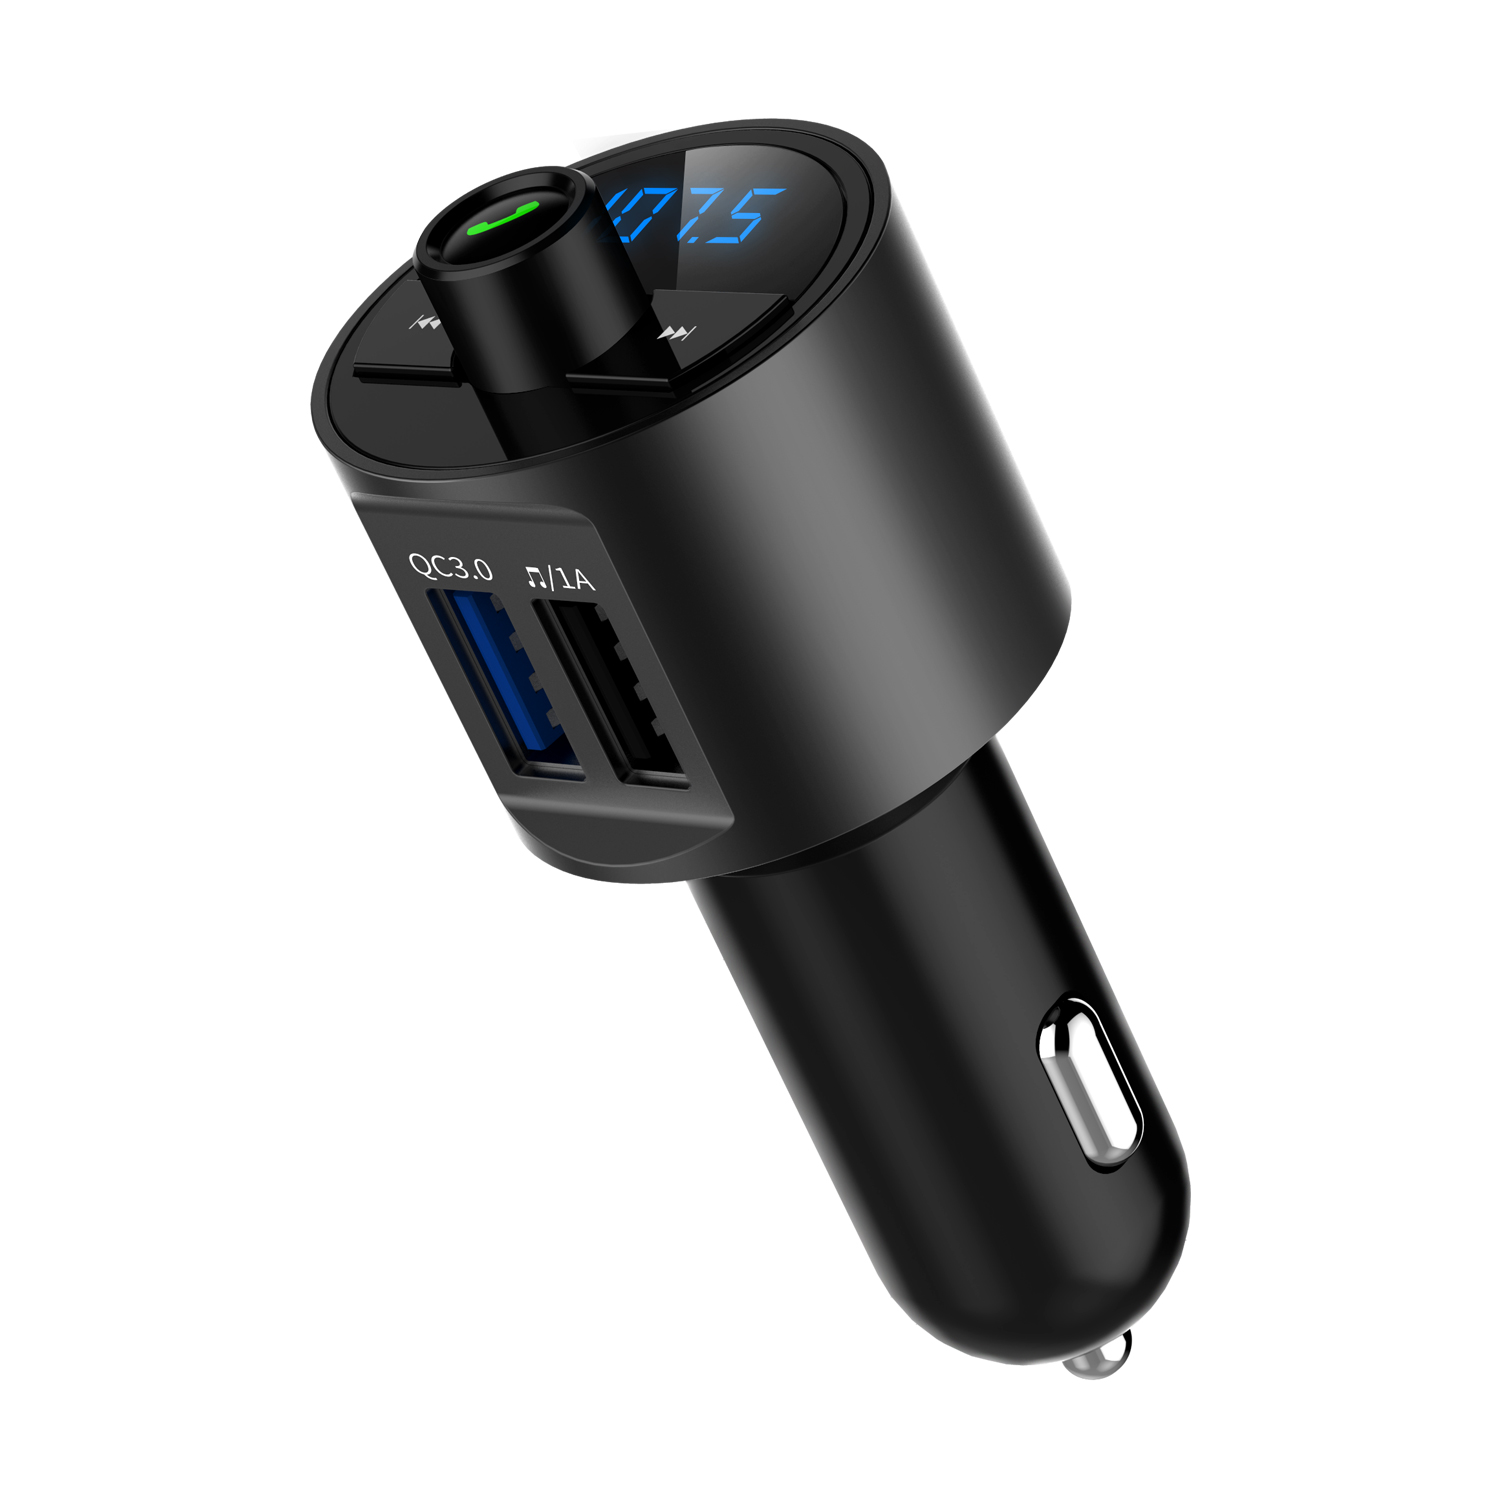 Mini LED Display Dual USB Bluetooth Hands-Free Smart Quick Wireless 3.6A Car Charger with Microphone